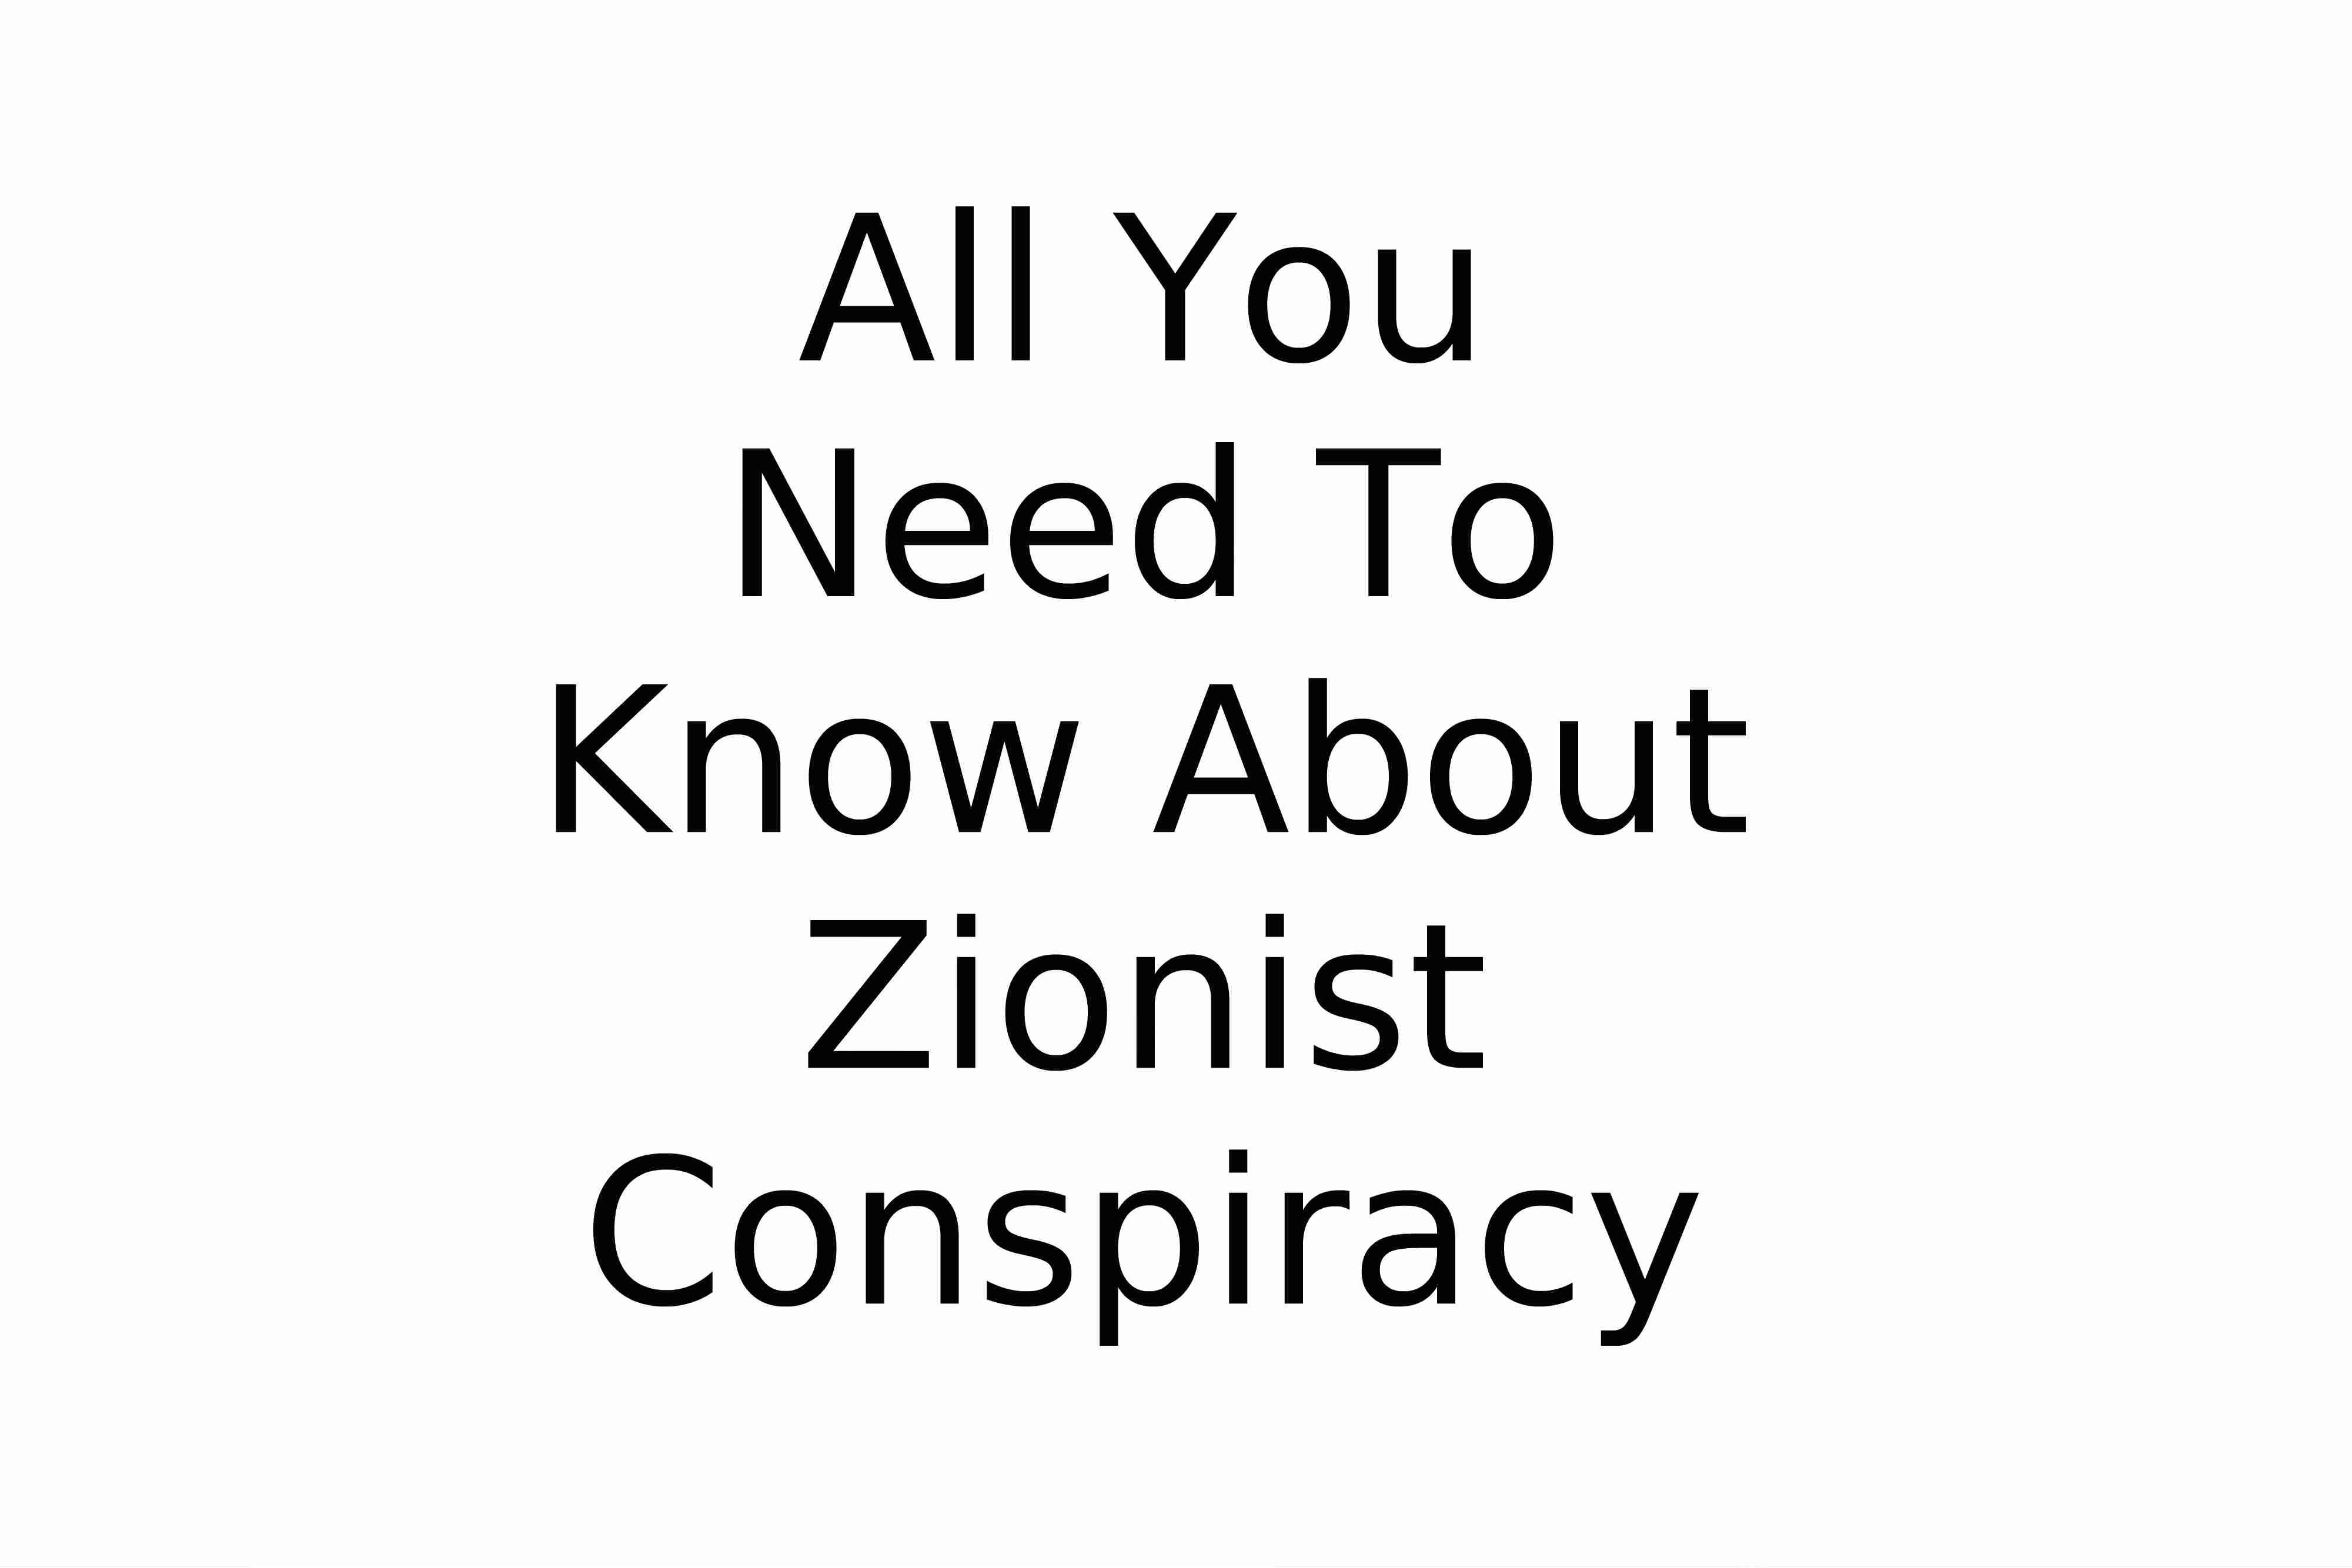 All You Need To Know About Zionist Conspiracy